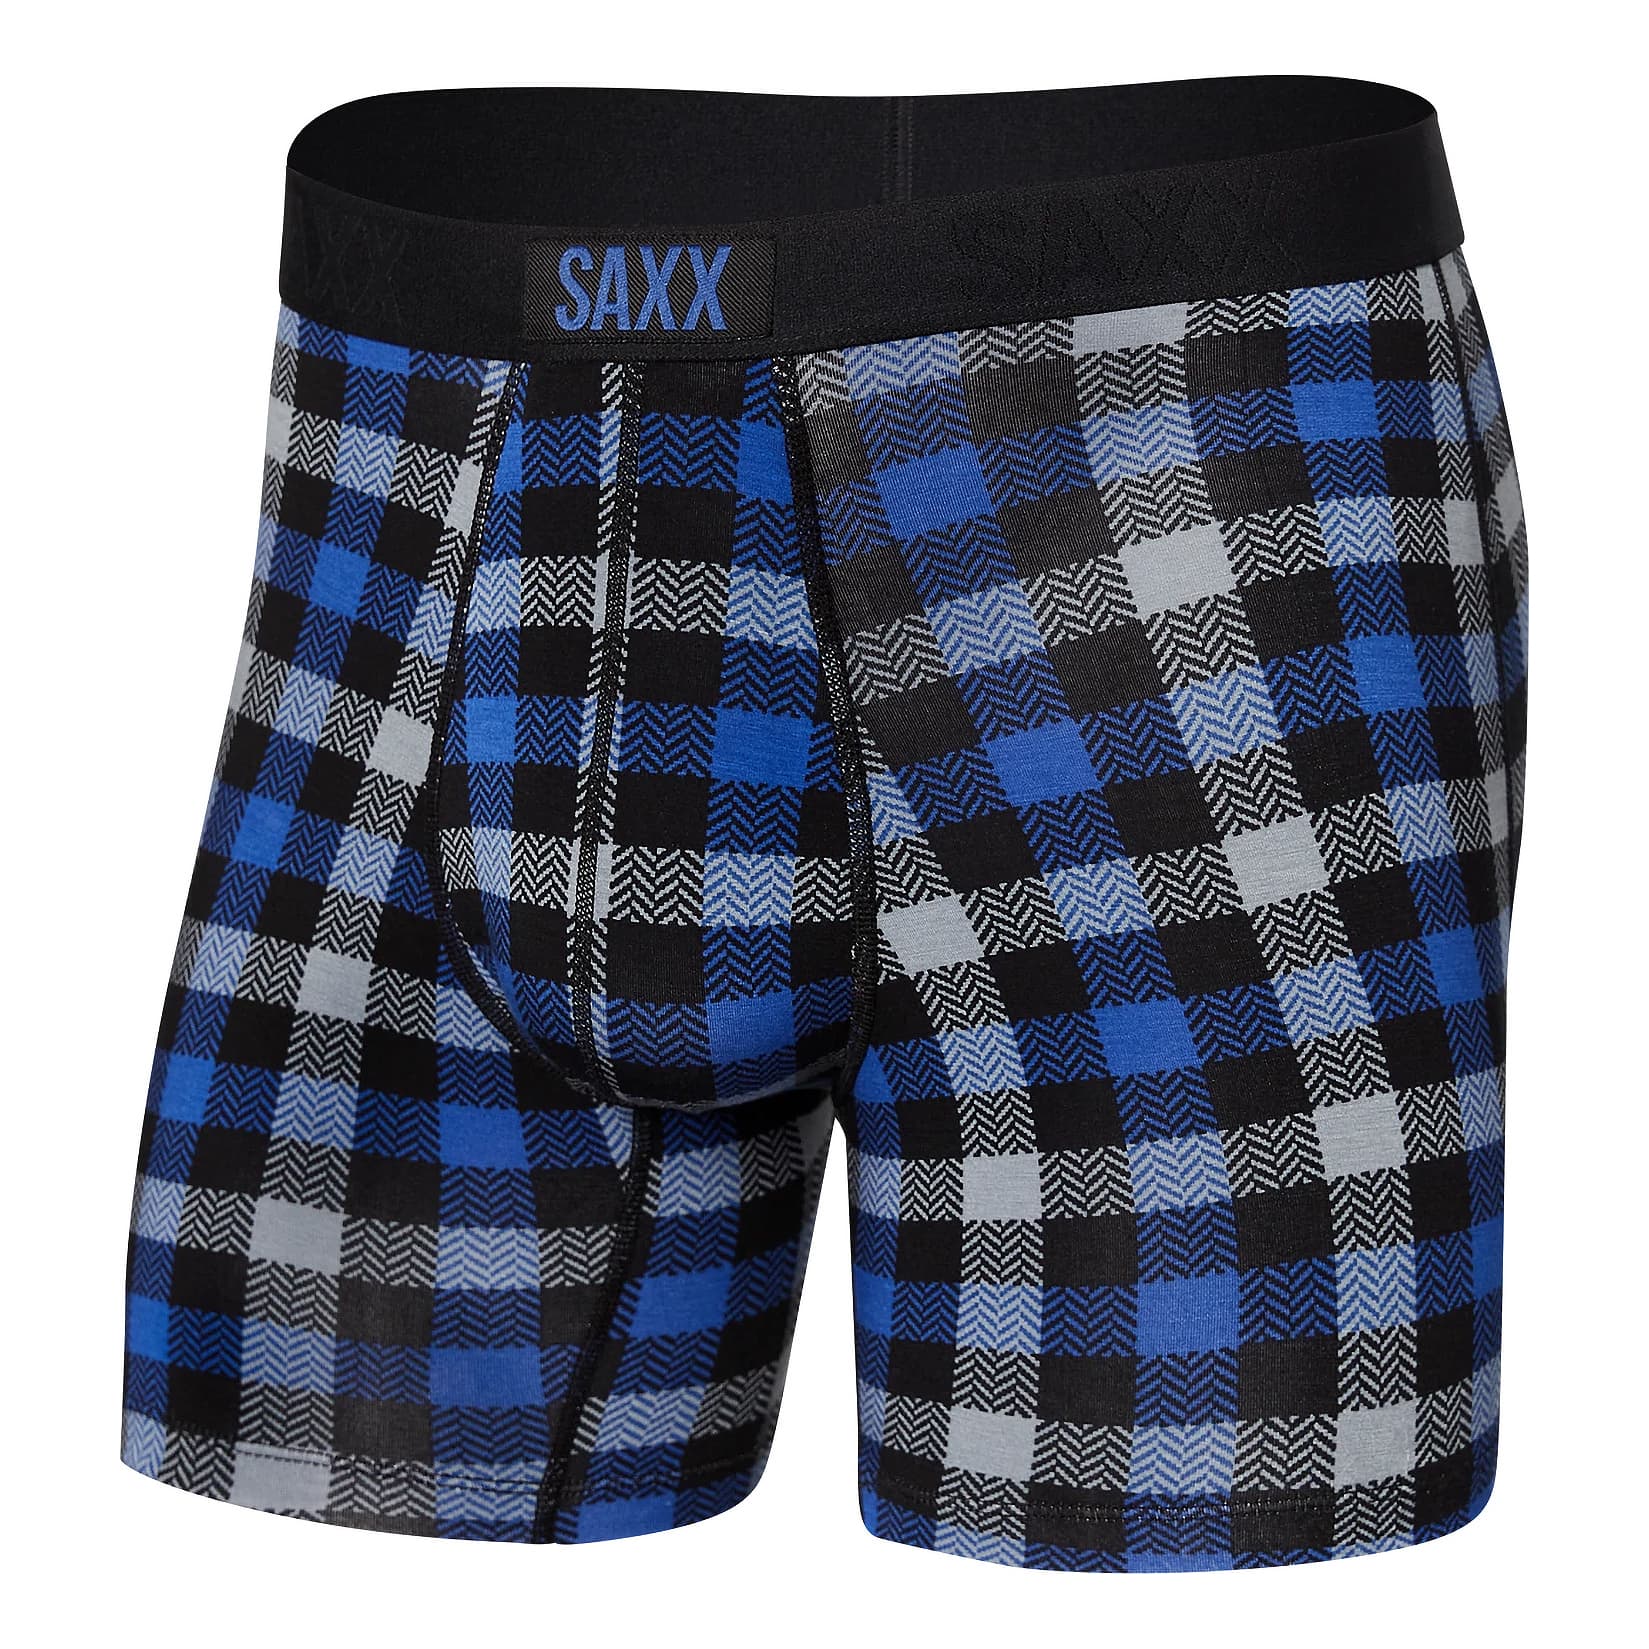 SAXX® Vibe Modern Fit Boxers - Blue Flannel Check